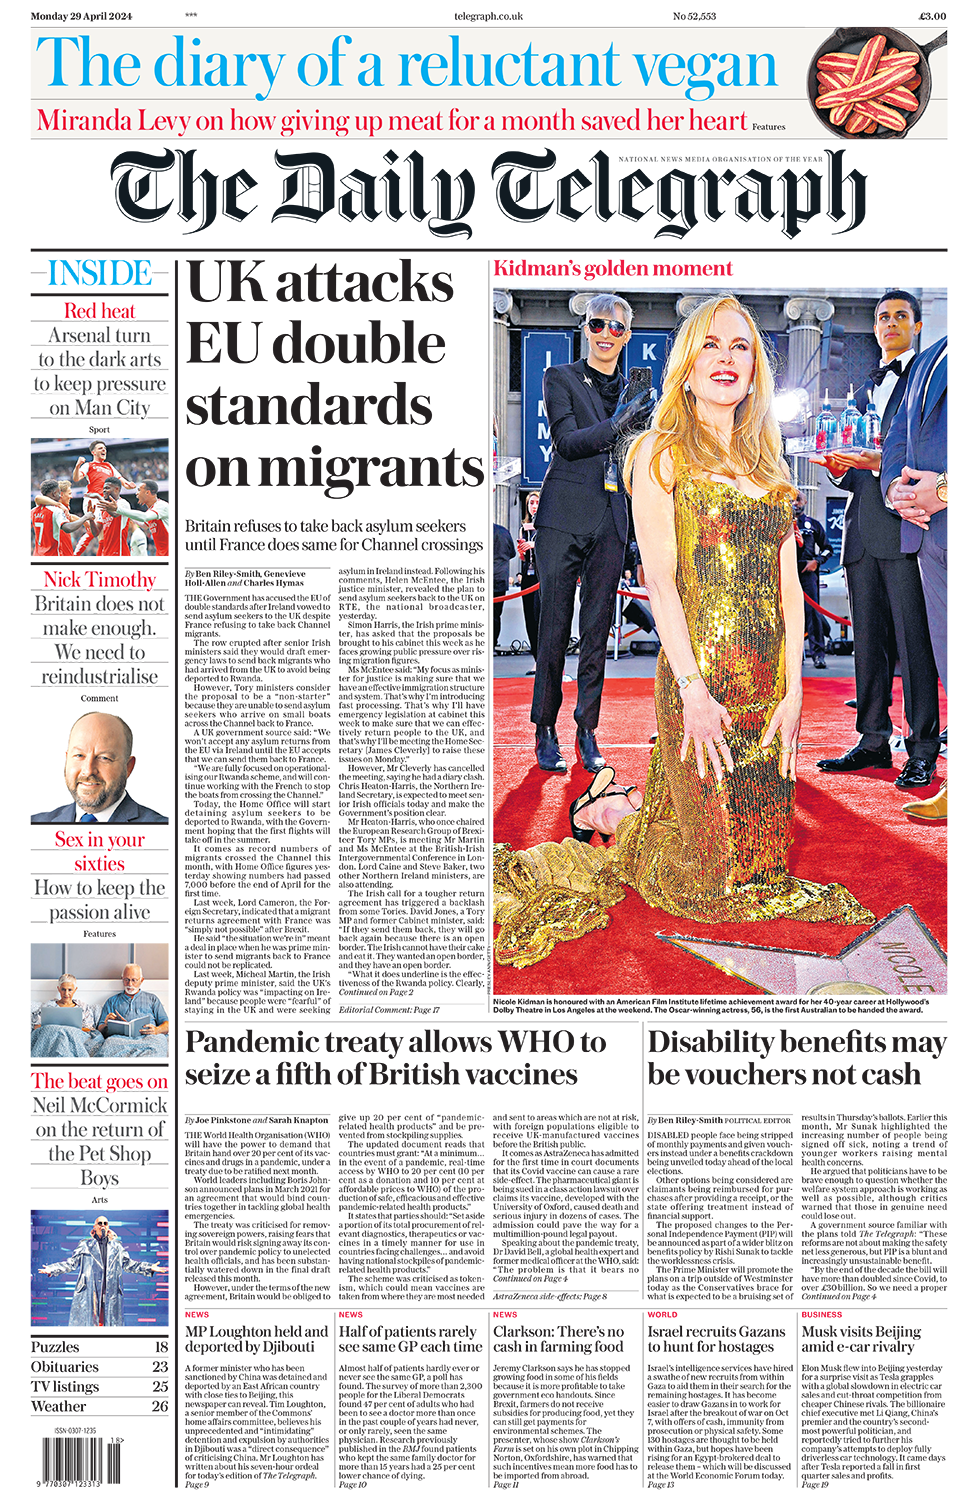 The headline in the Telegraph reads: "UK attacks EU double standards on migrants".